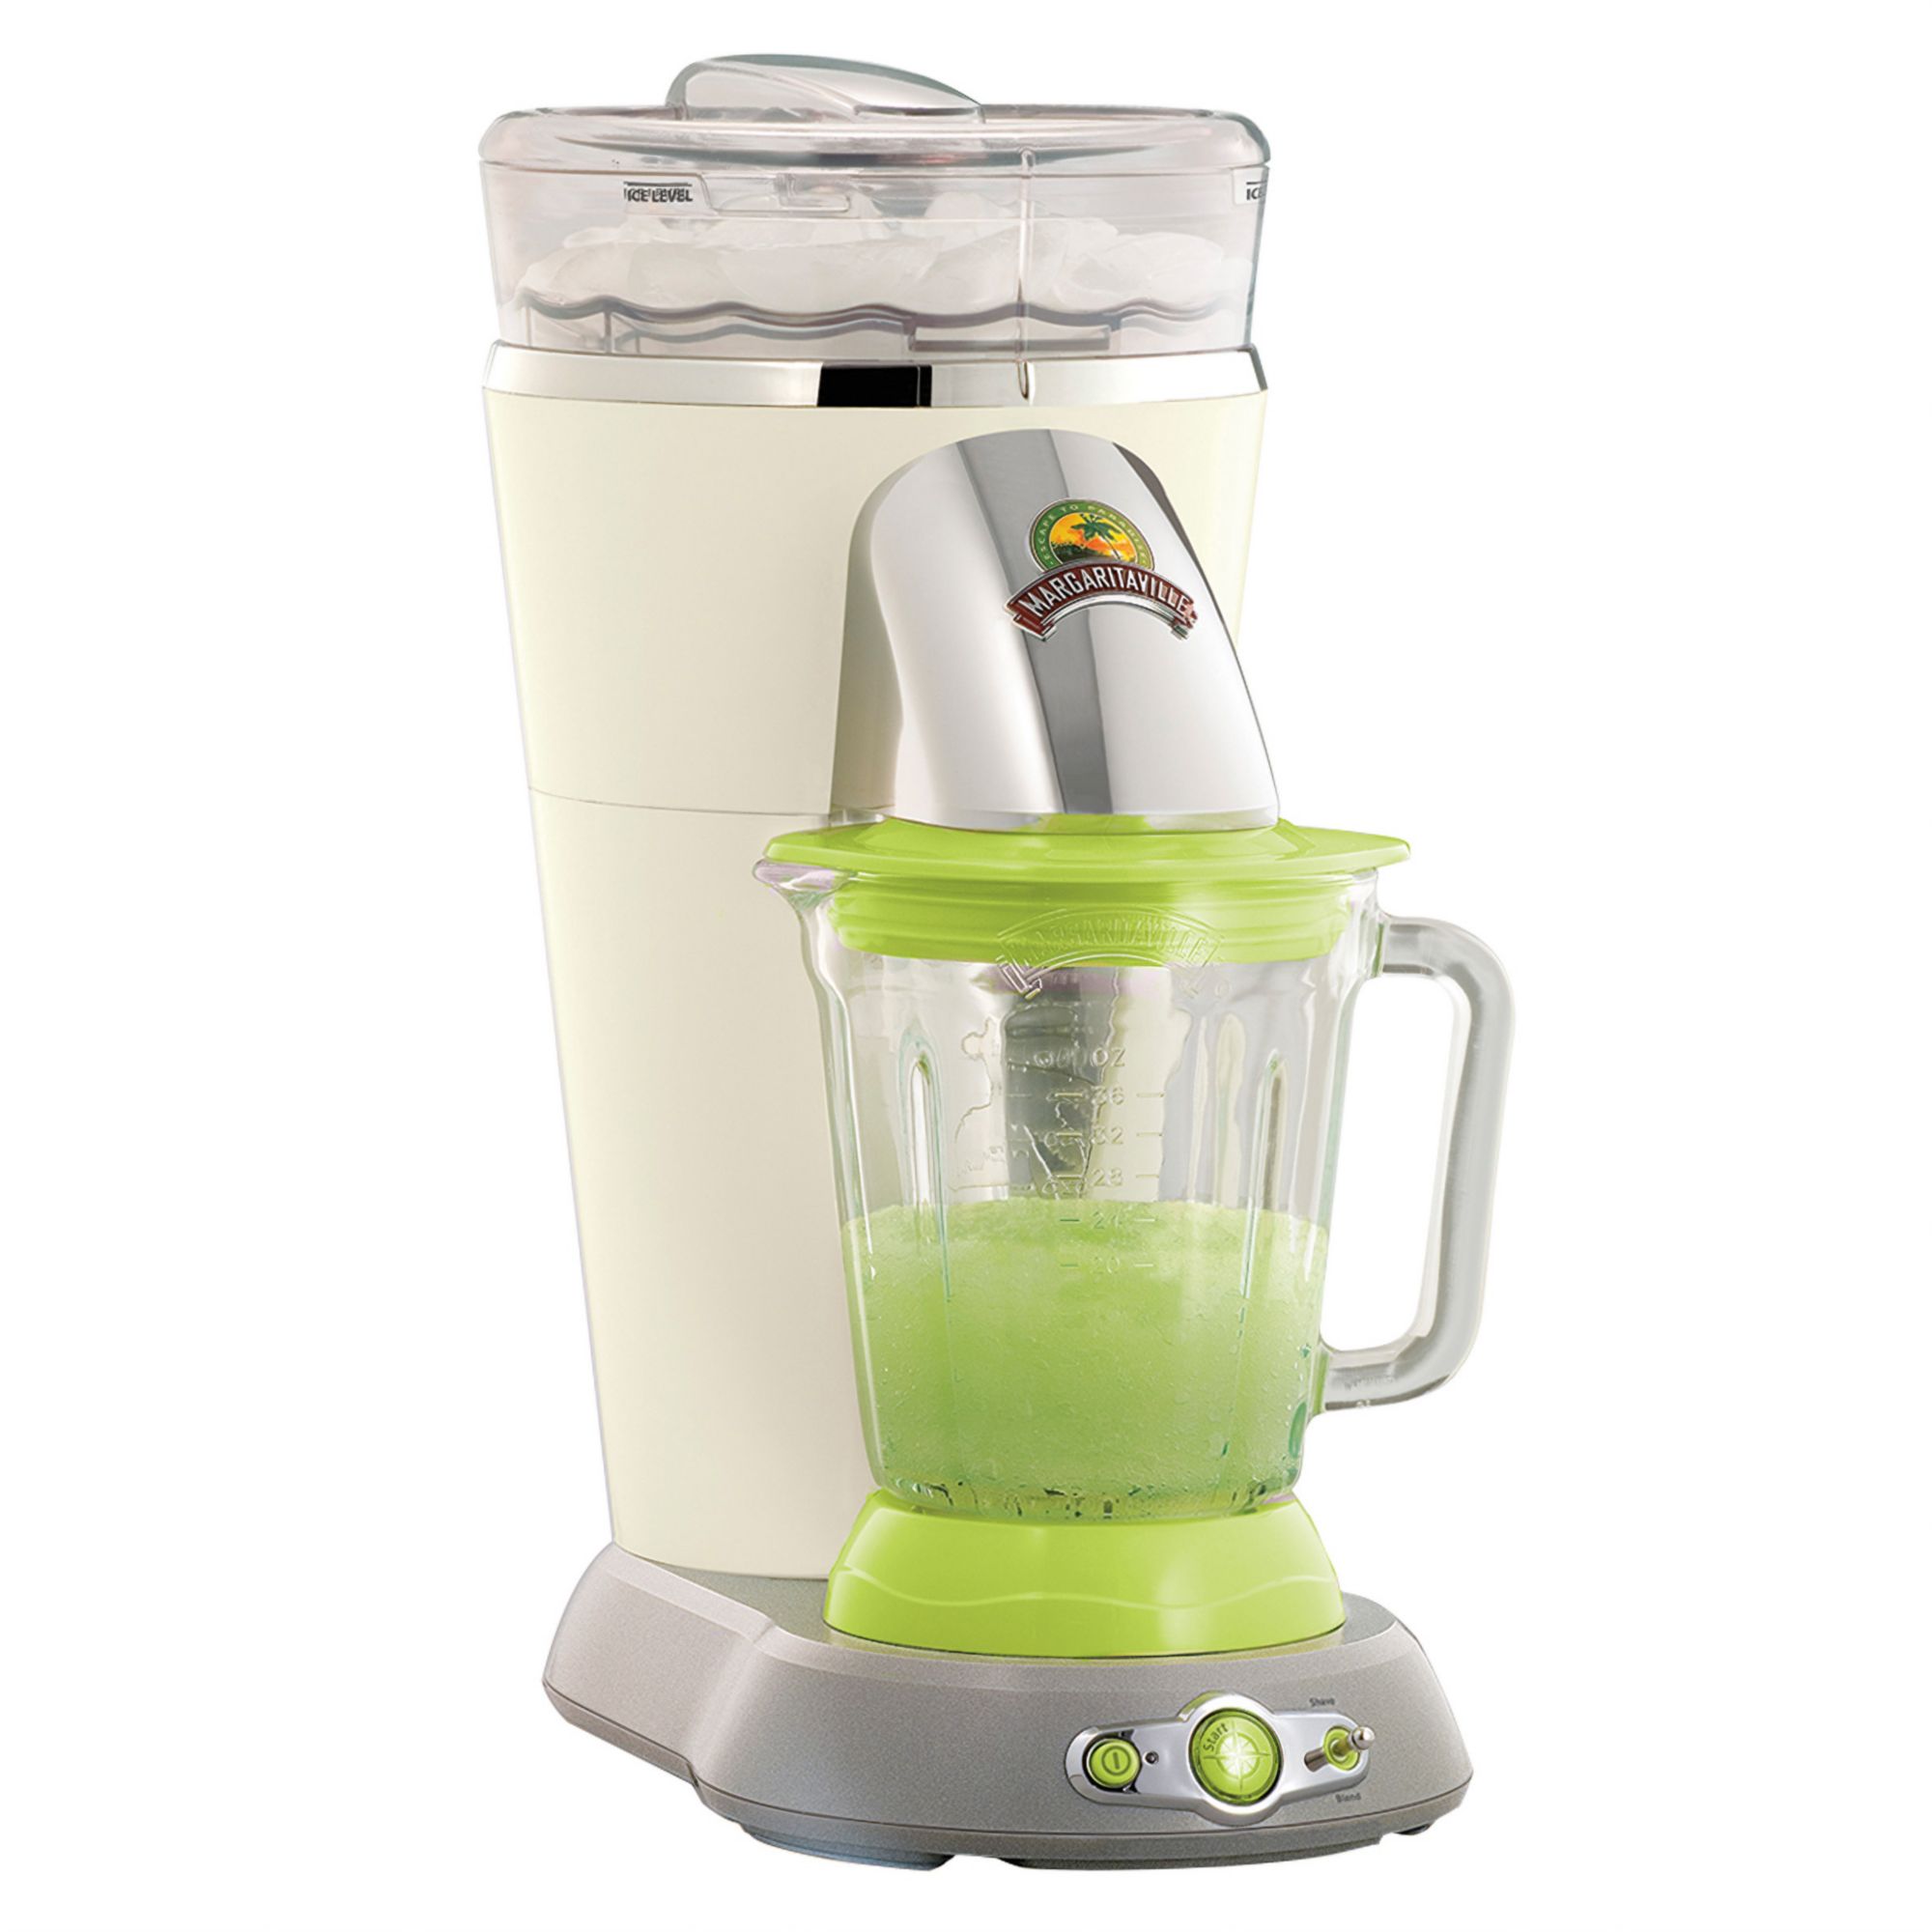 Margaritaville Bahamas Frozen Concoction Maker - Off White and Lime Green